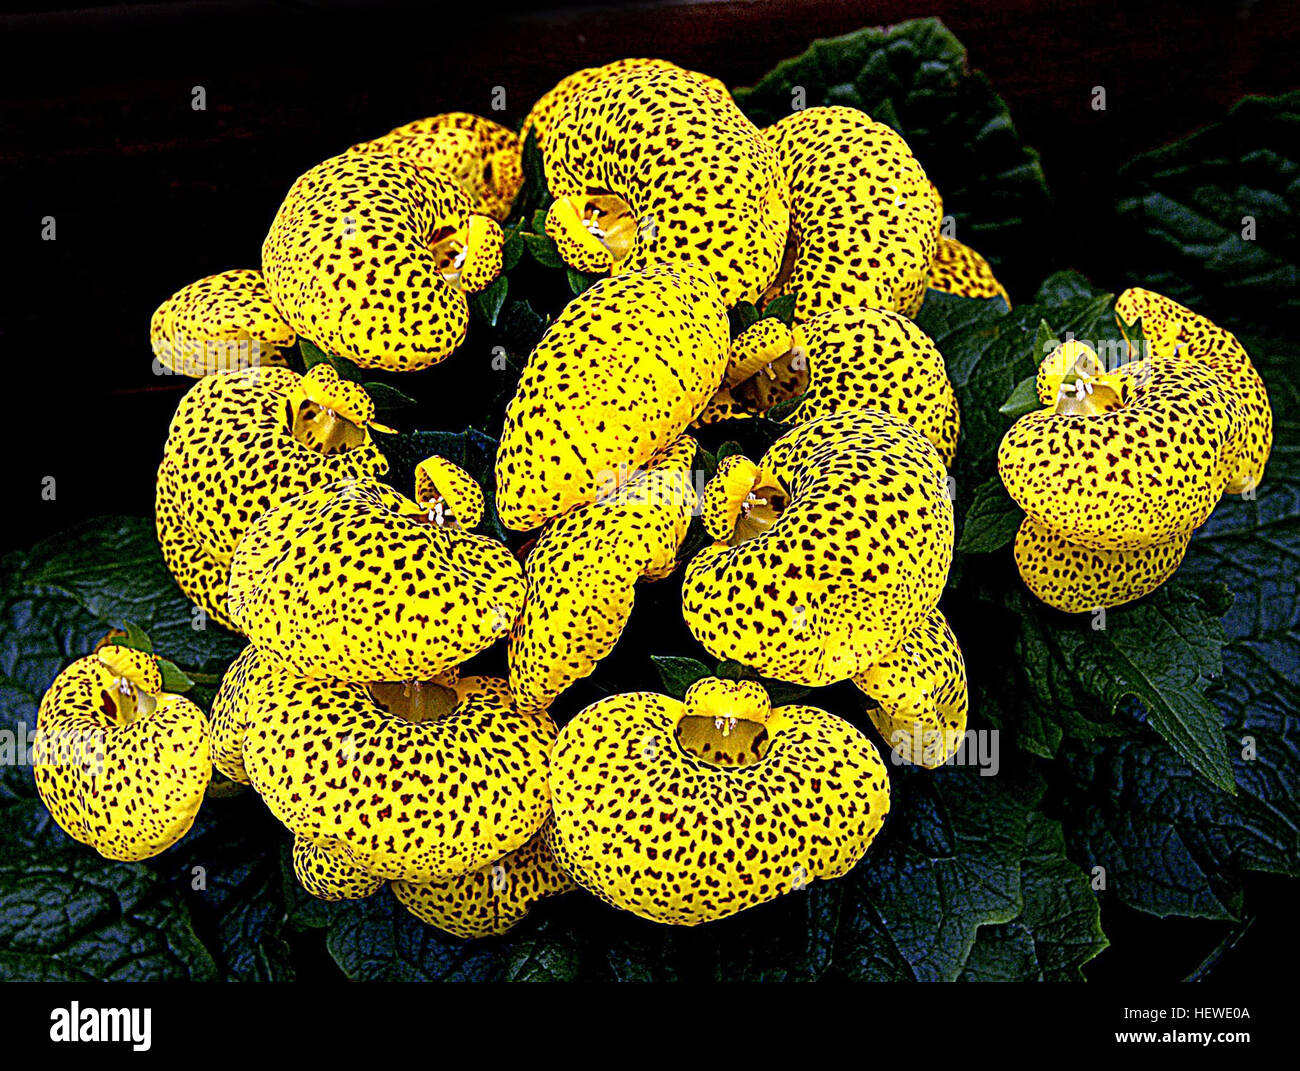 Calceolaria, also called lady's purse, slipper flower and pocketbook flower or slipperwort, is a genus of plants in the Calceolariaceae family, sometimes classified in Scrophulariaceae by some authors. This genus consists of about 388 species of shrubs, lianas and herbs, and the geographical range extends from Patagonia to central Mexico, with its distribution centre in Andean region  Calceolaria species have usually yellow or orange flowers, which can have red or purple spots. Stock Photo